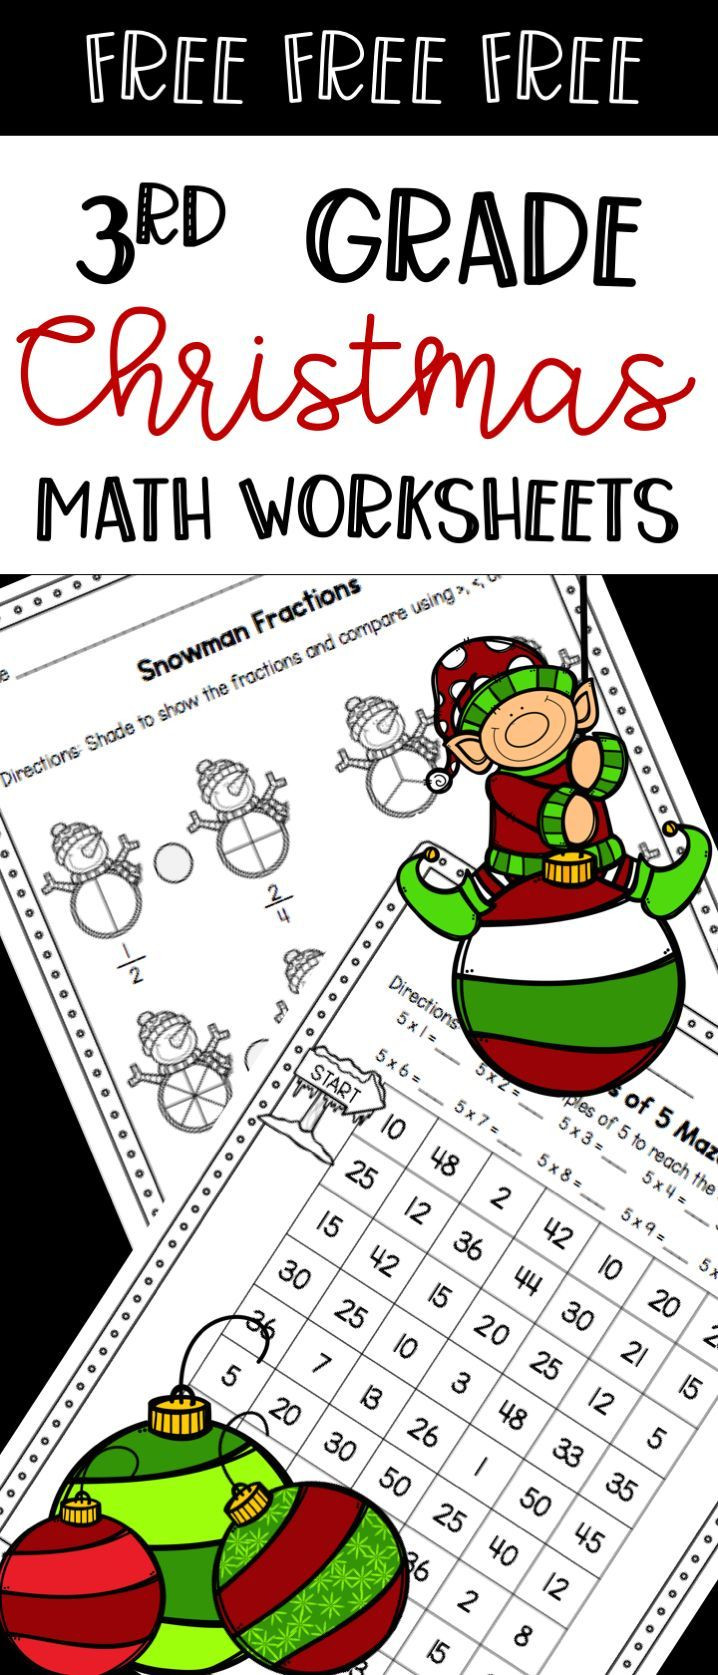 Christmas Math Worksheets 3rd Grade Christmas Worksheets Math Practice Pages Free Sample